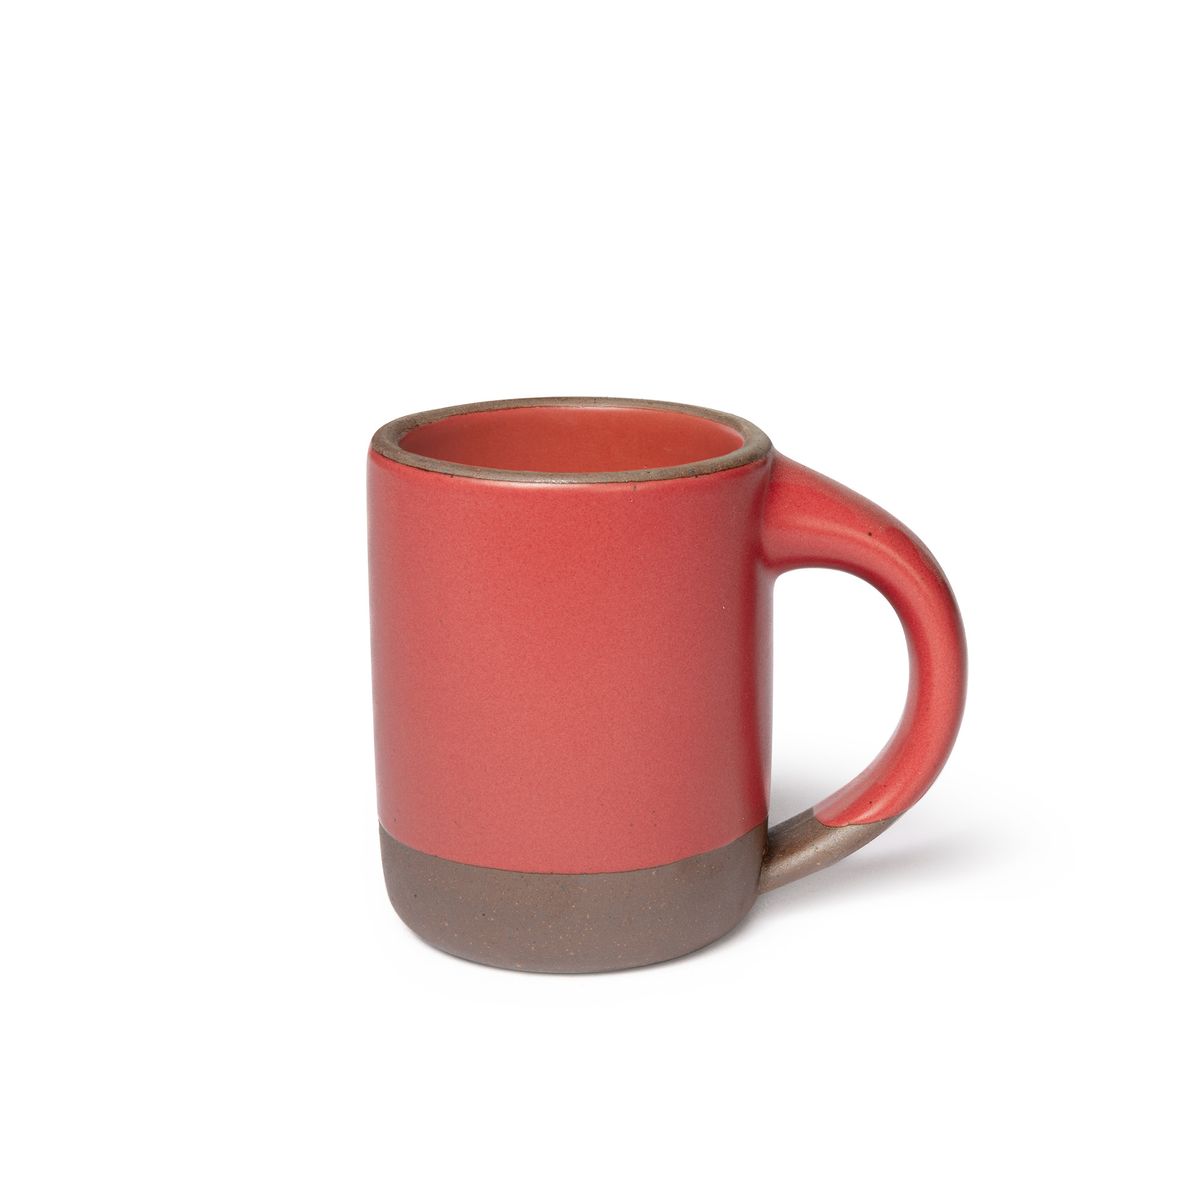 A medium sized ceramic mug with handle in a bold red color featuring iron speckles and unglazed rim and bottom base.